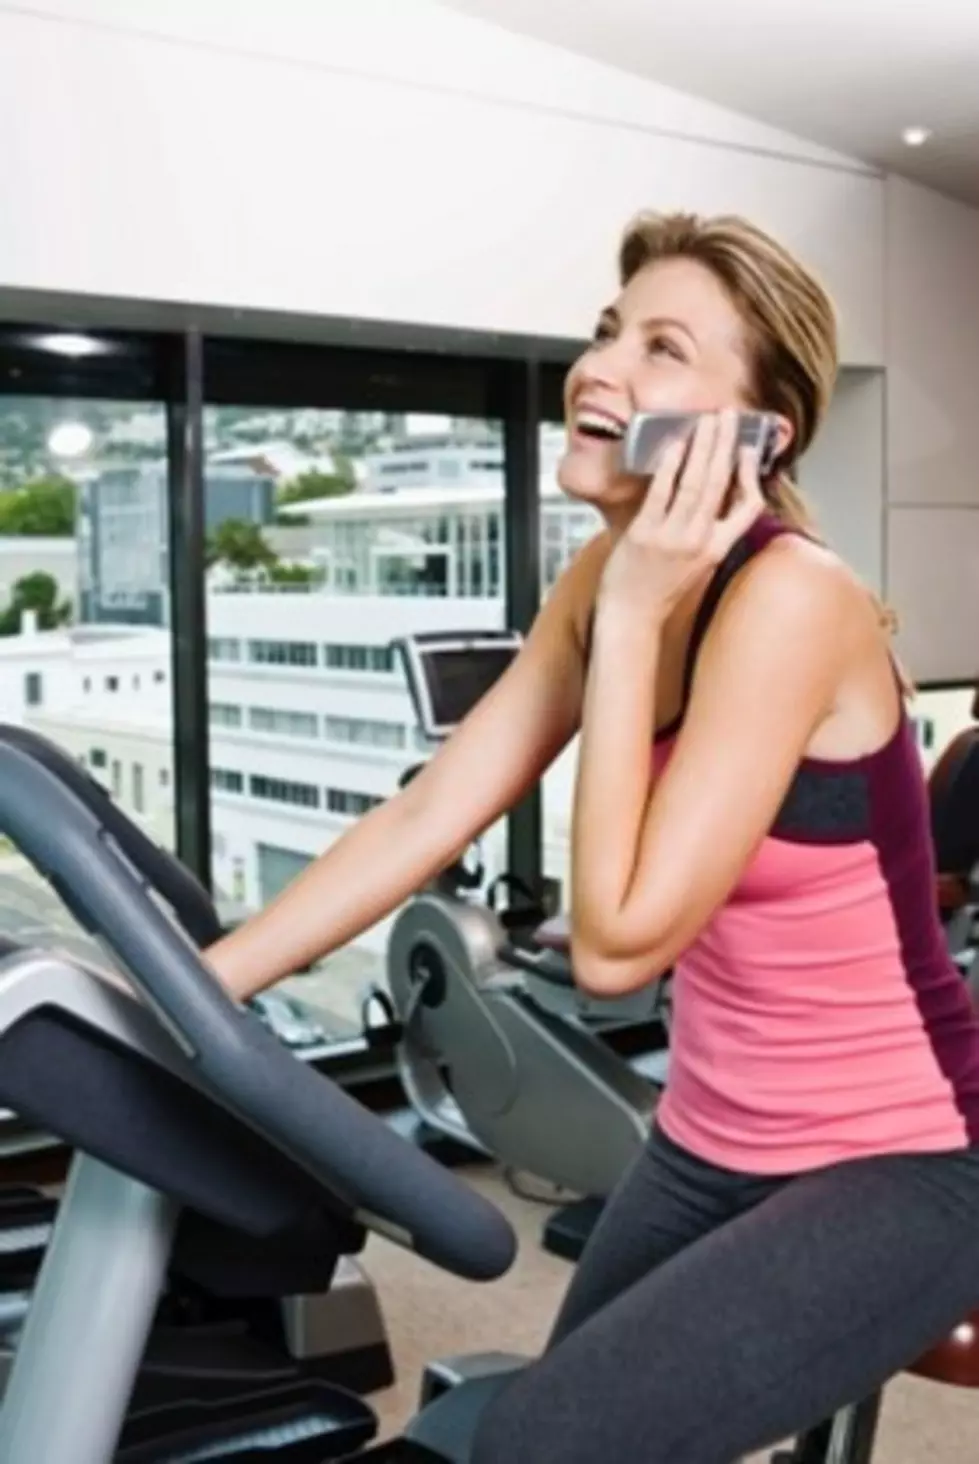 10 People You NEVER Want to Be at the Gym